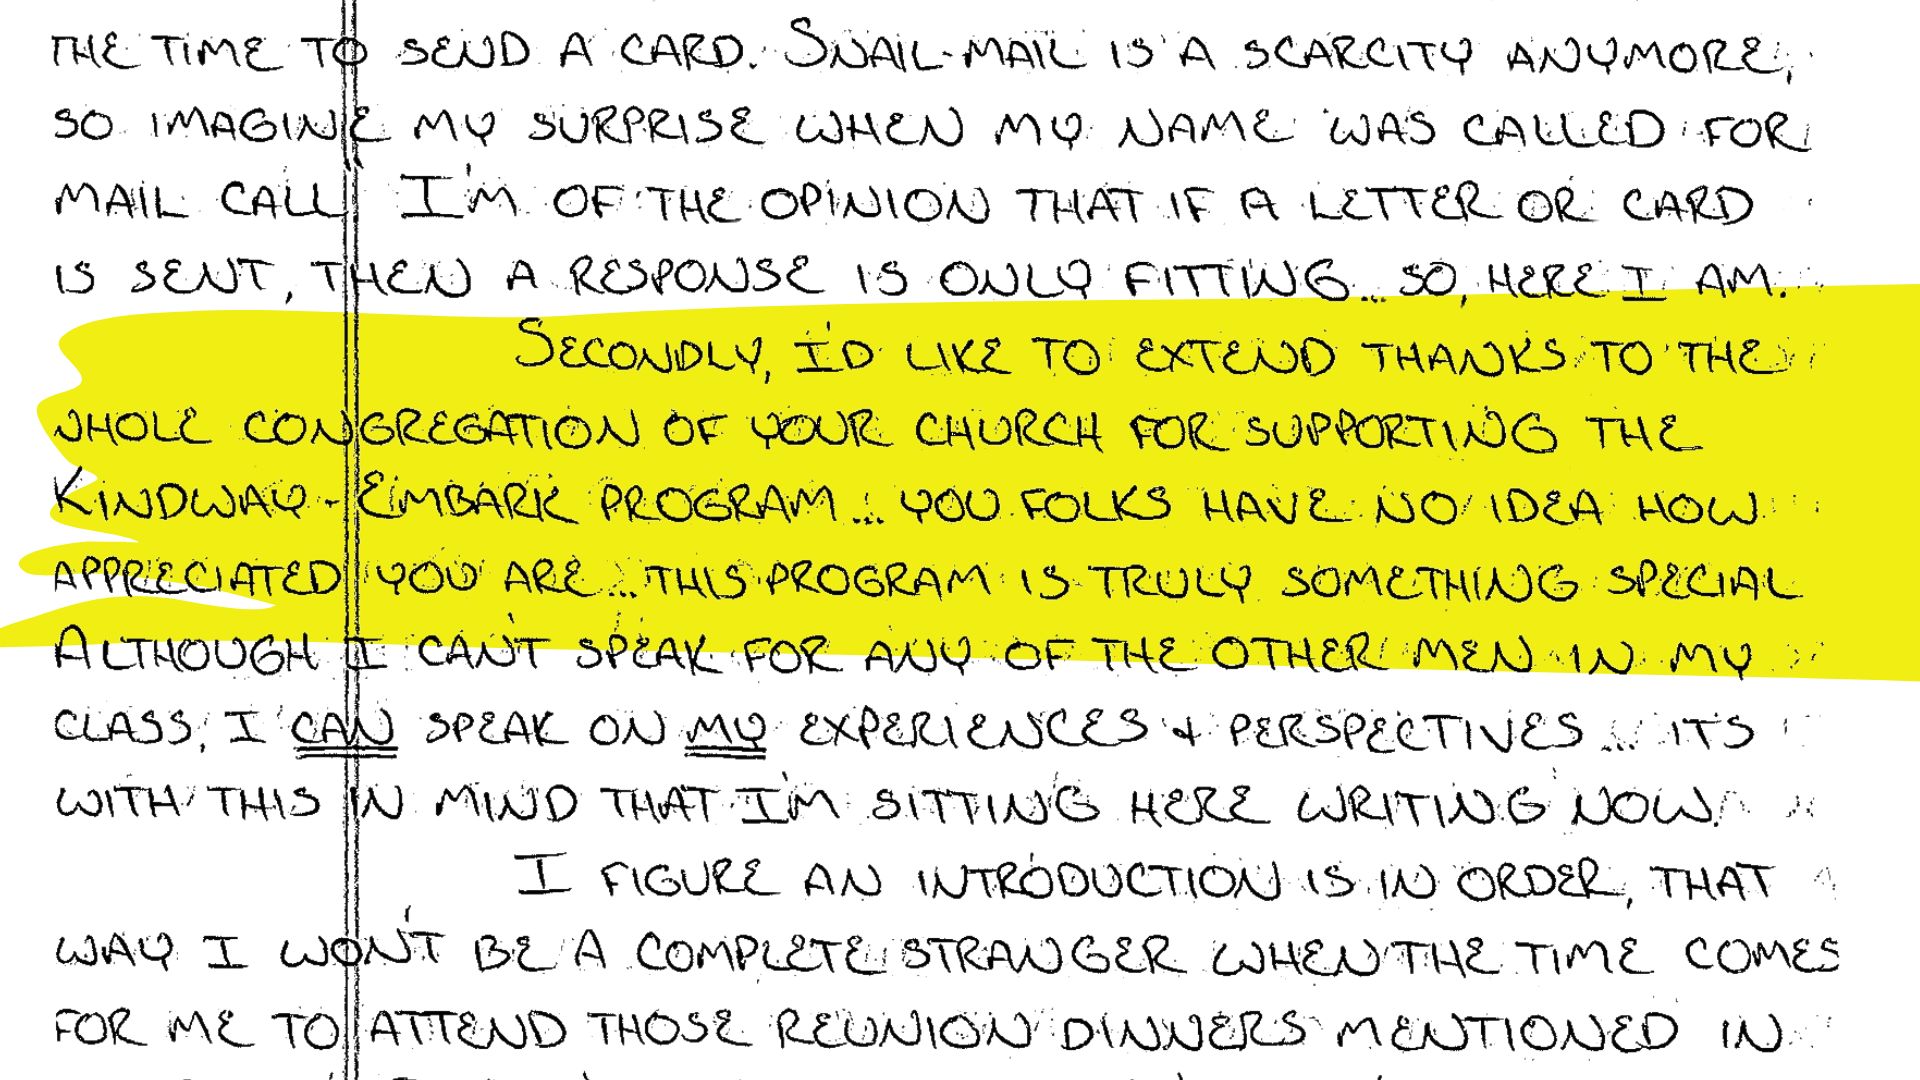 Image of the letter with some text highlighted